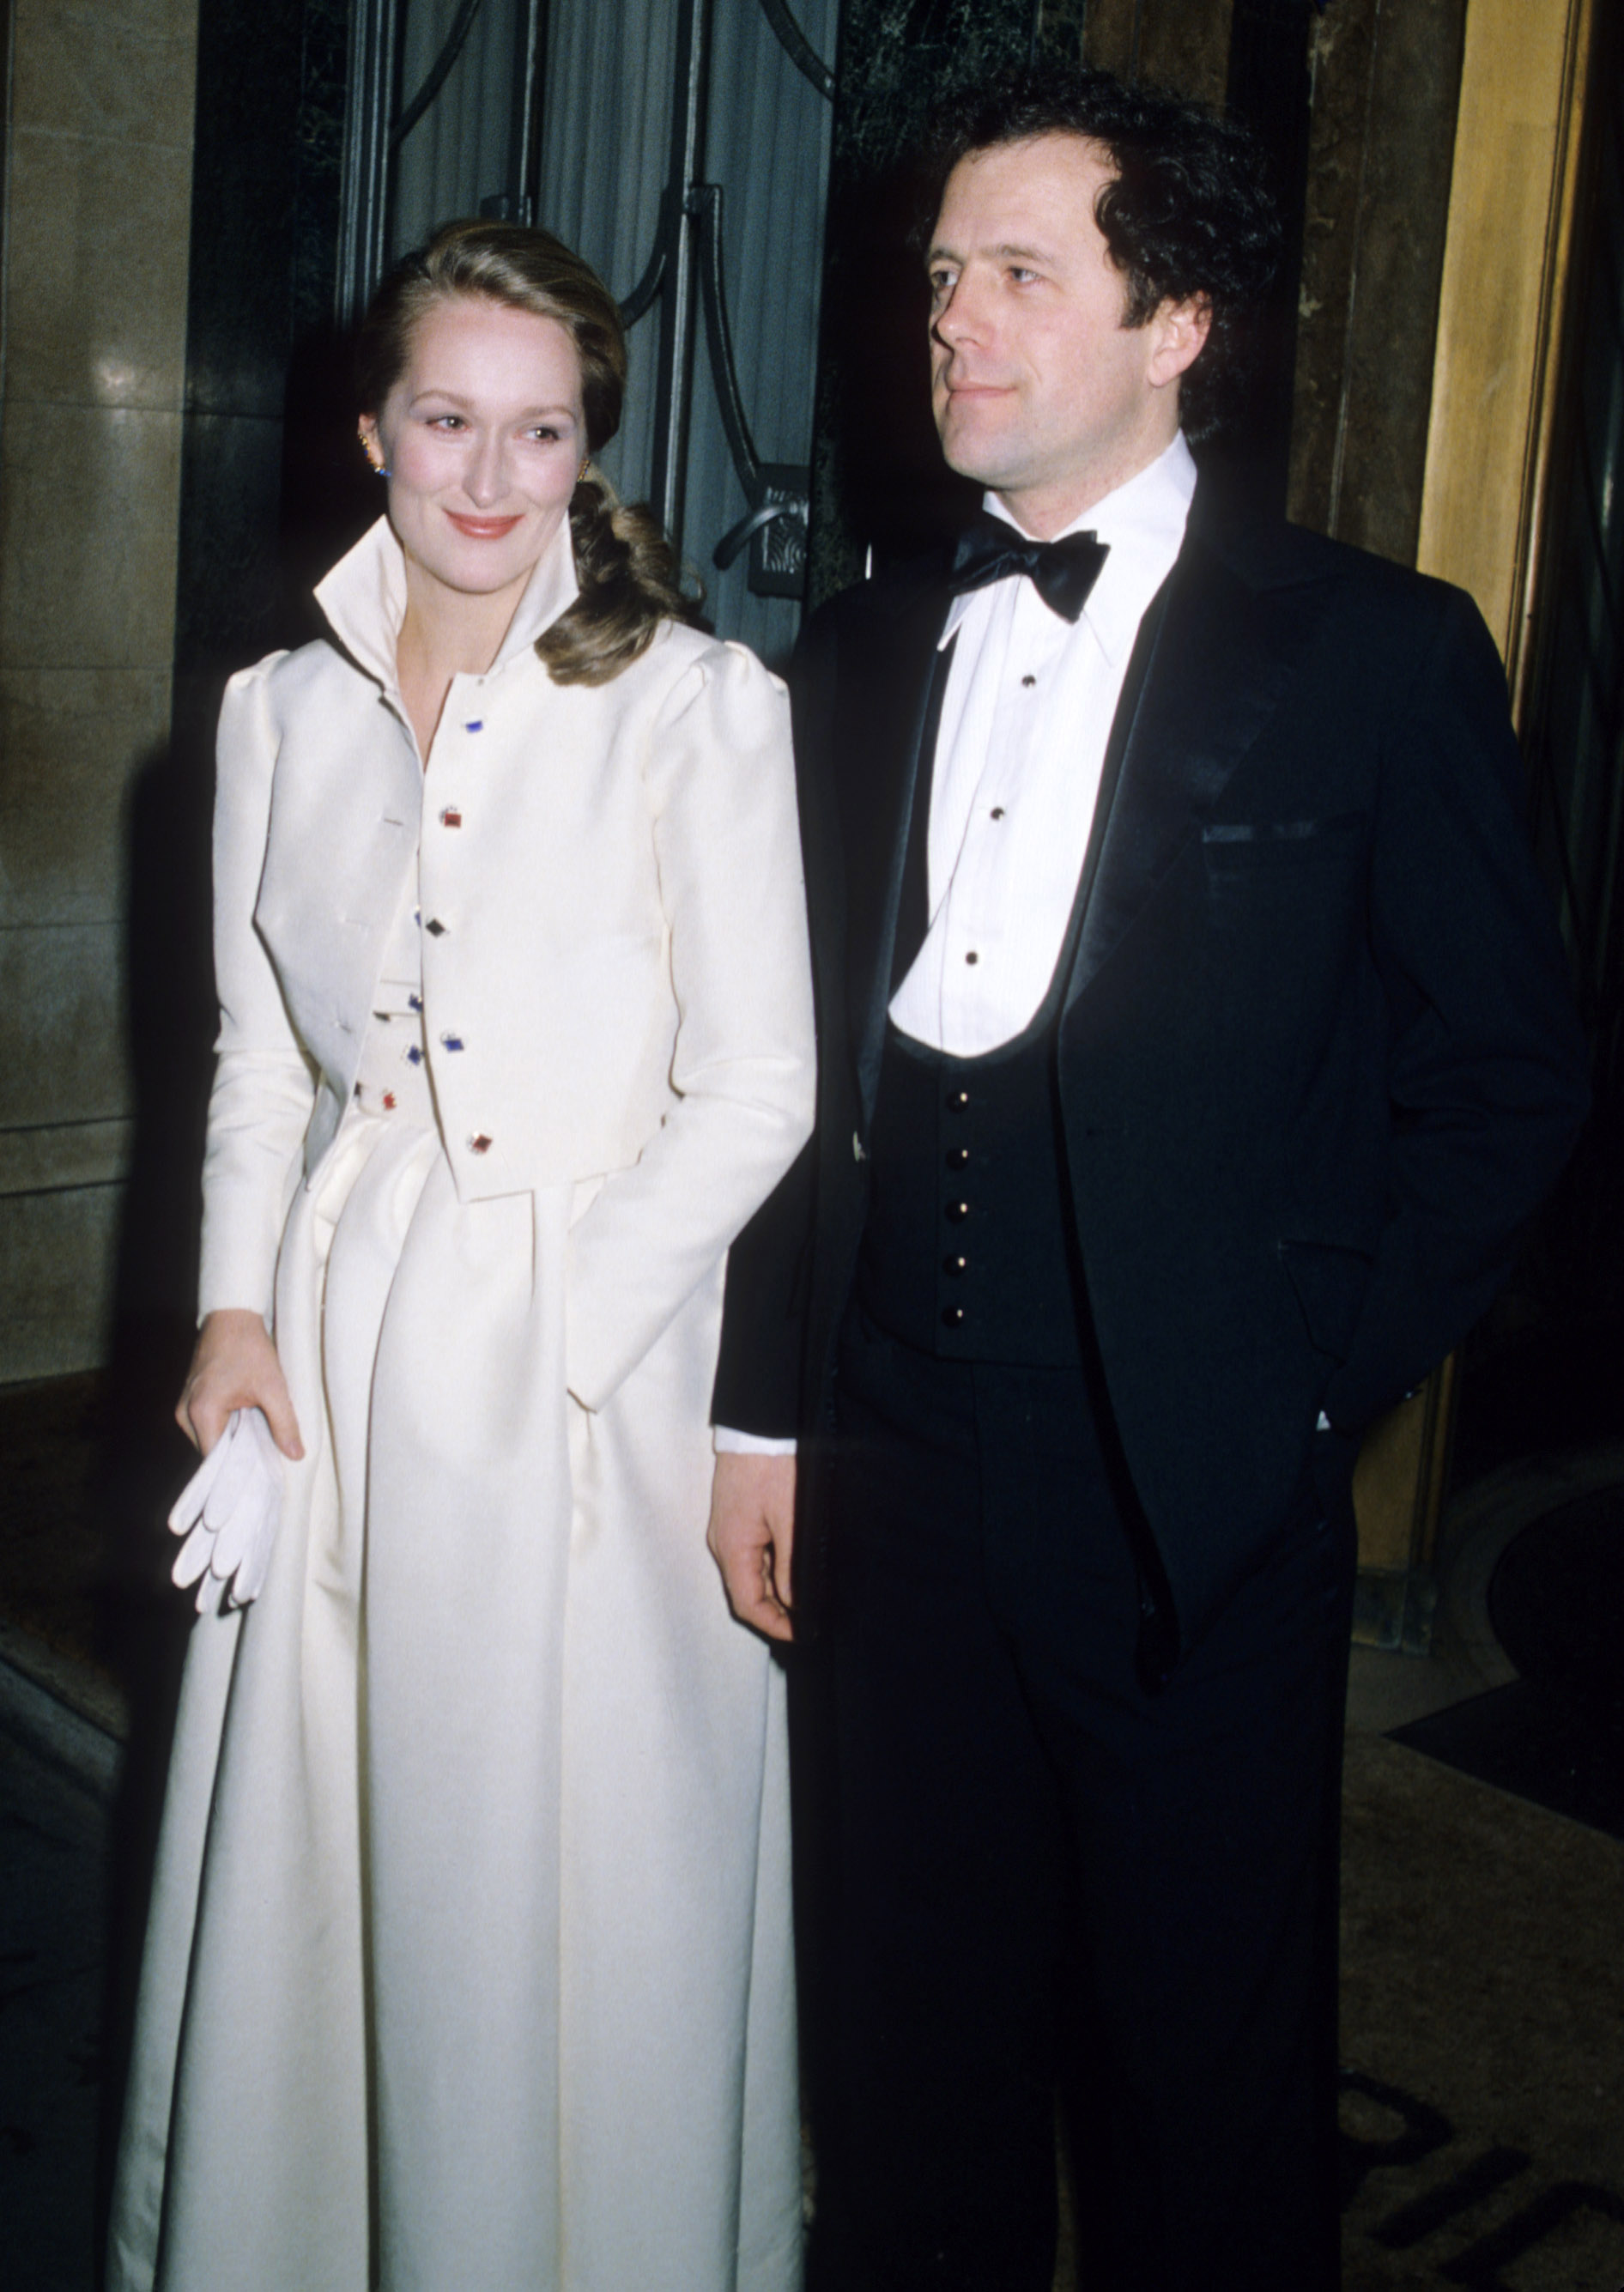 Meryl Streep and Don Gummer in London on March 25, 1980 | Source: Getty Images